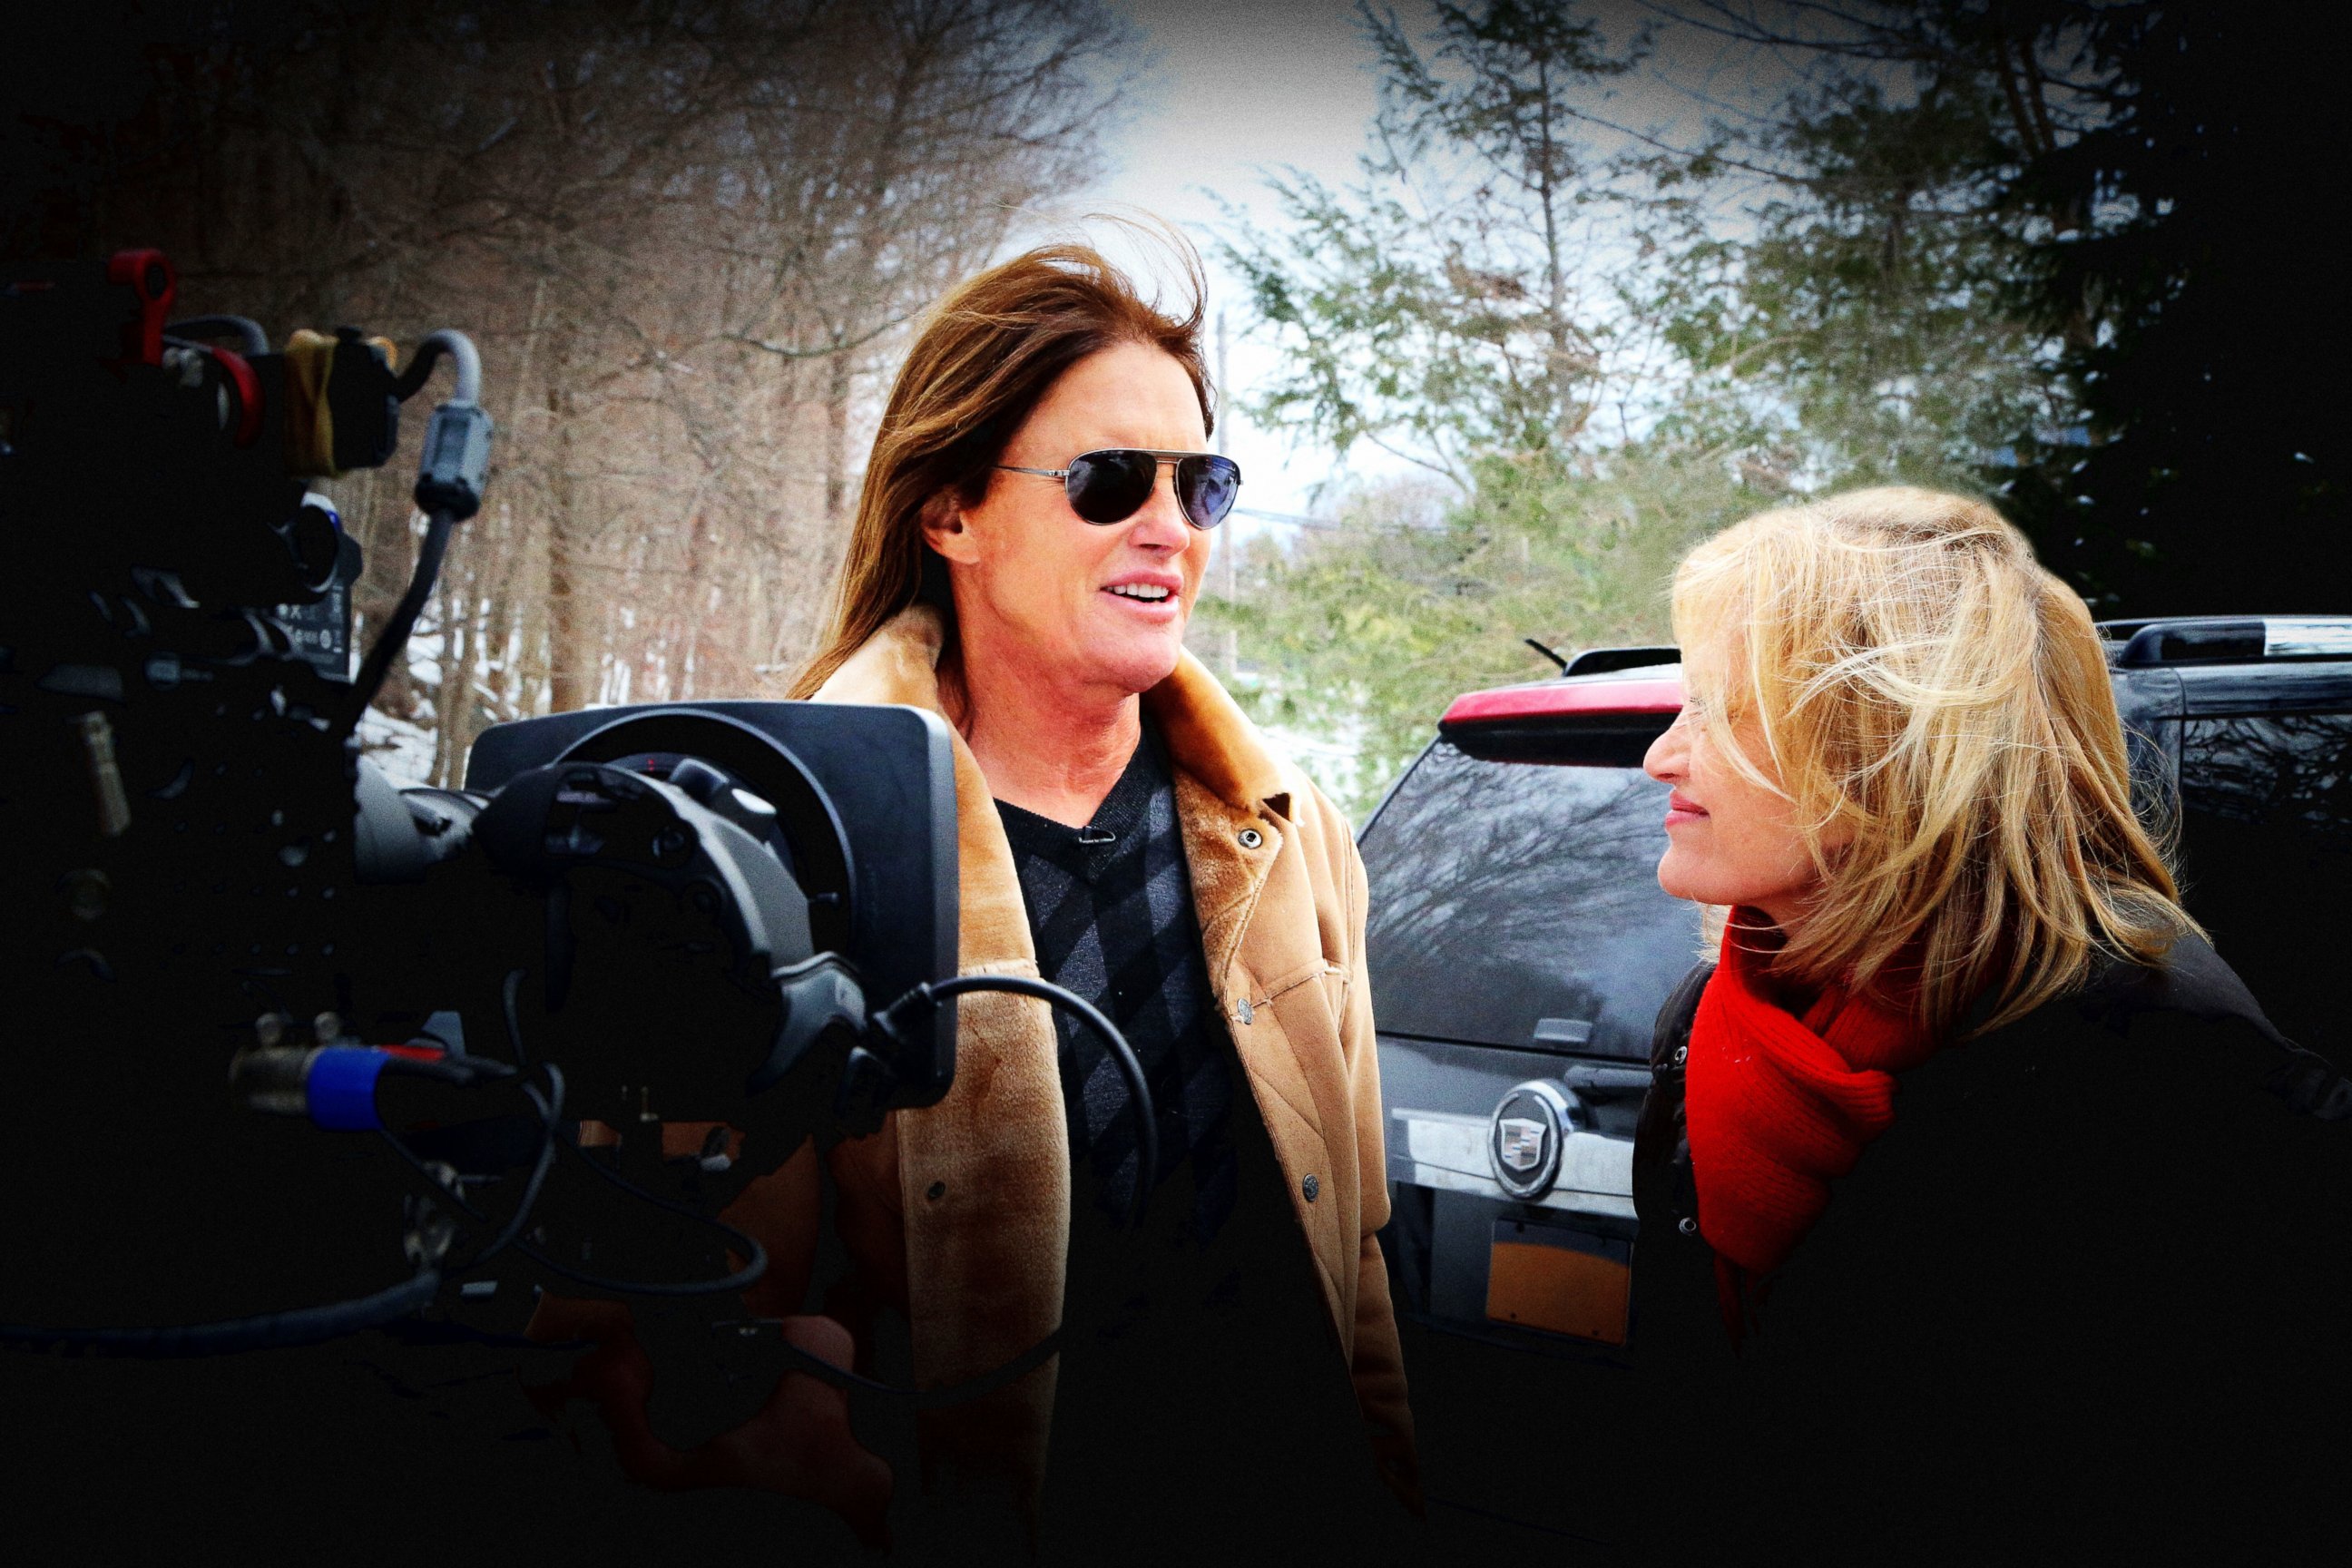 PHOTO: Bruce Jenner sat down for a far-ranging exclusive interview with ABC?s Diane Sawyer in a special edition of ?20/20.? This was the last interview he gave before transitioning to Caitlyn Jenner.